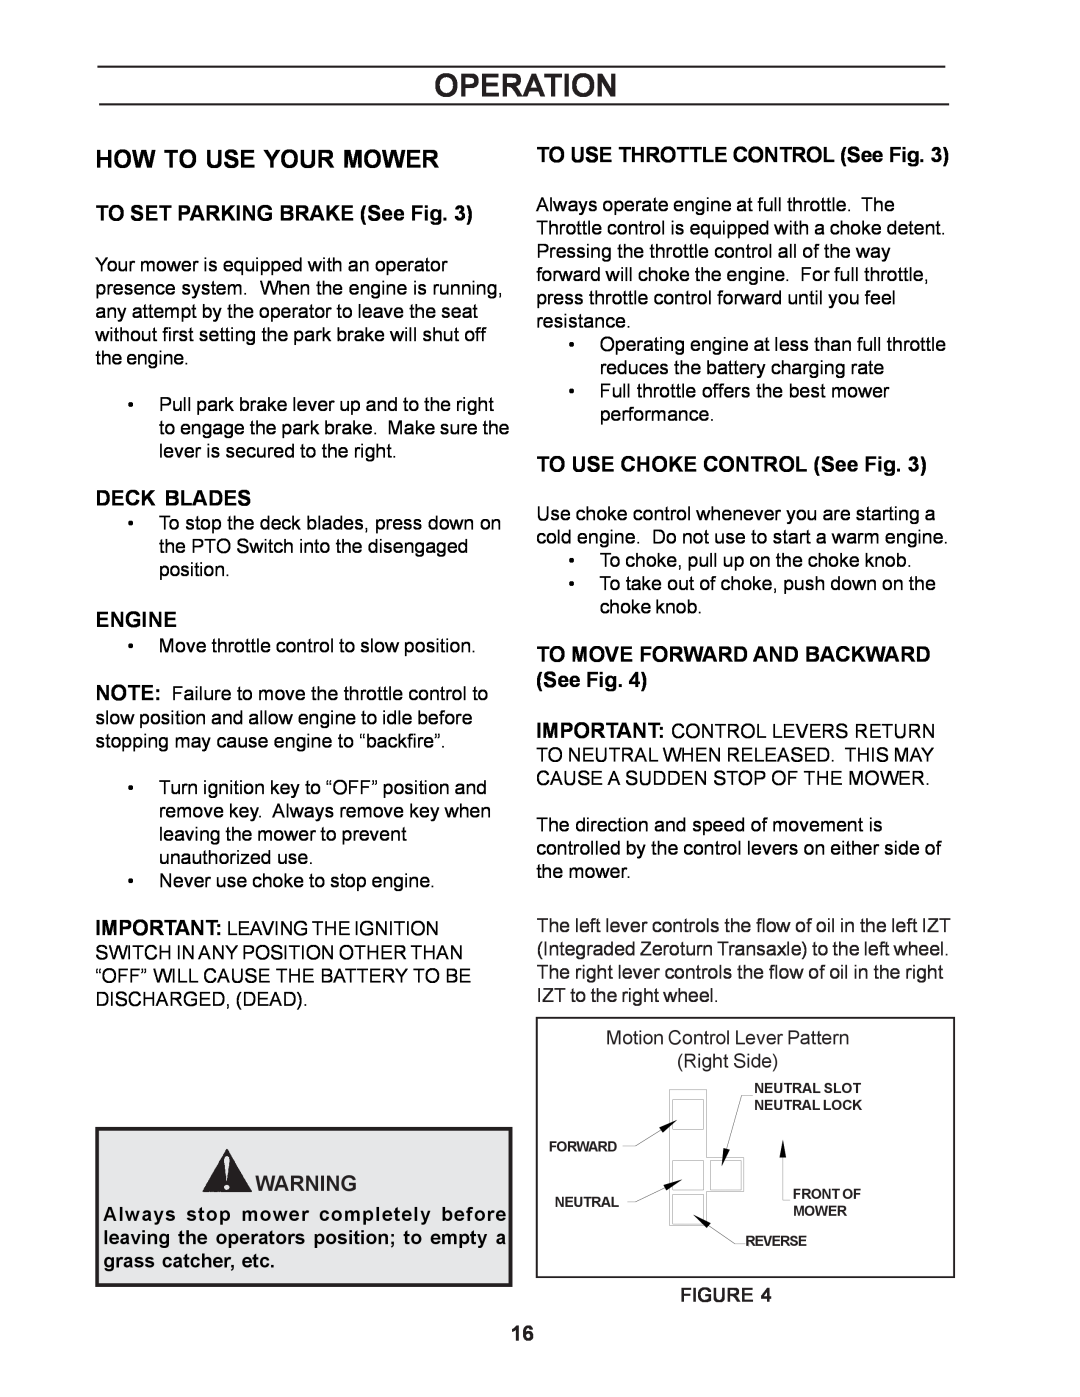 Yazoo/Kees ZCBI48181 manual How To Use Your Mower, TO SET PARKING BRAKE See Fig, Deck Blades, Engine, Operation 